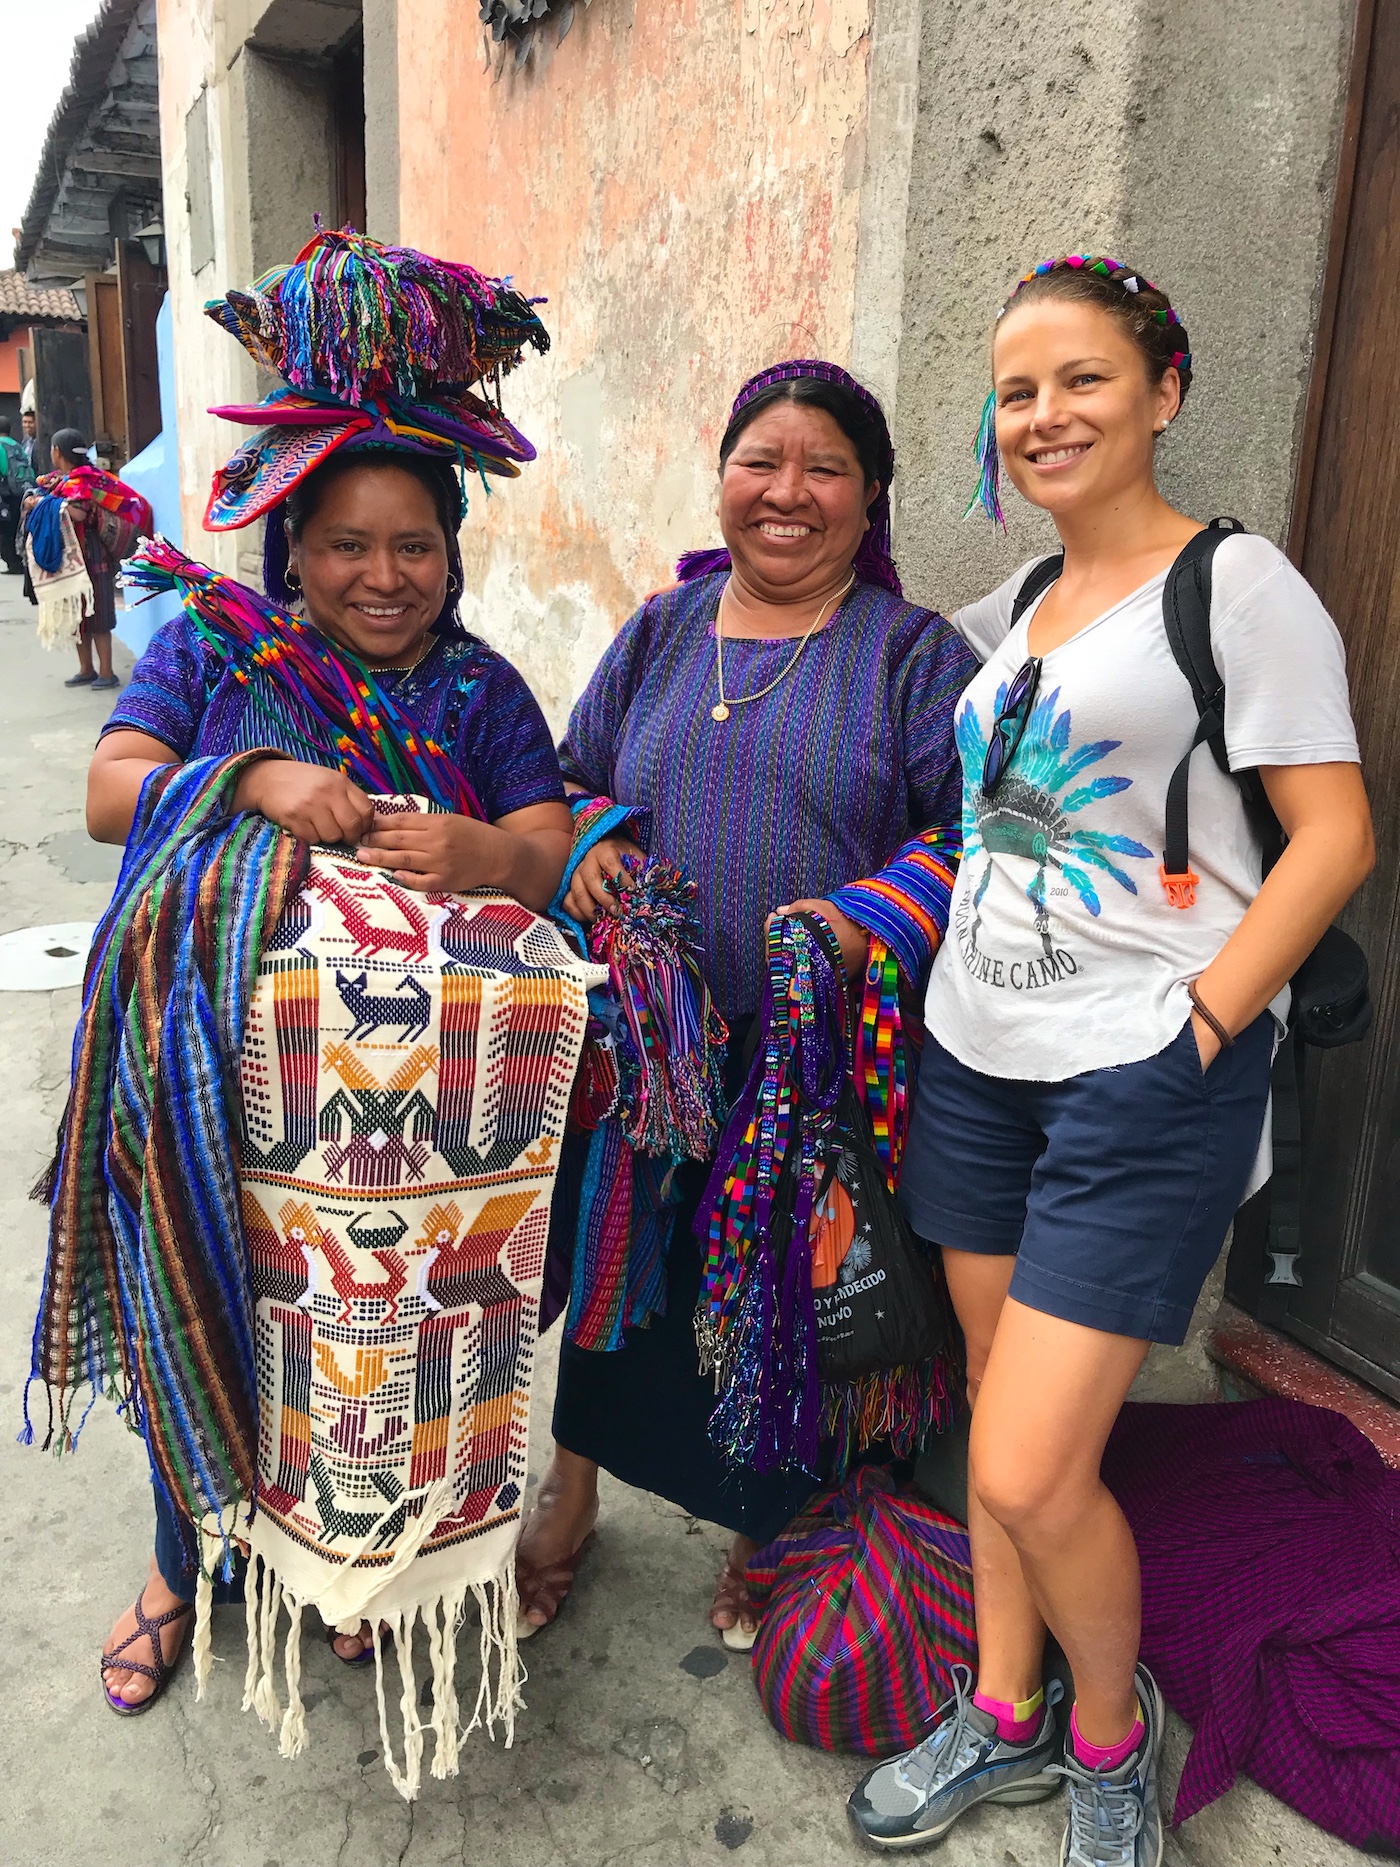 Couldn't escape to buy something from these beautiful ladies of Guatemala